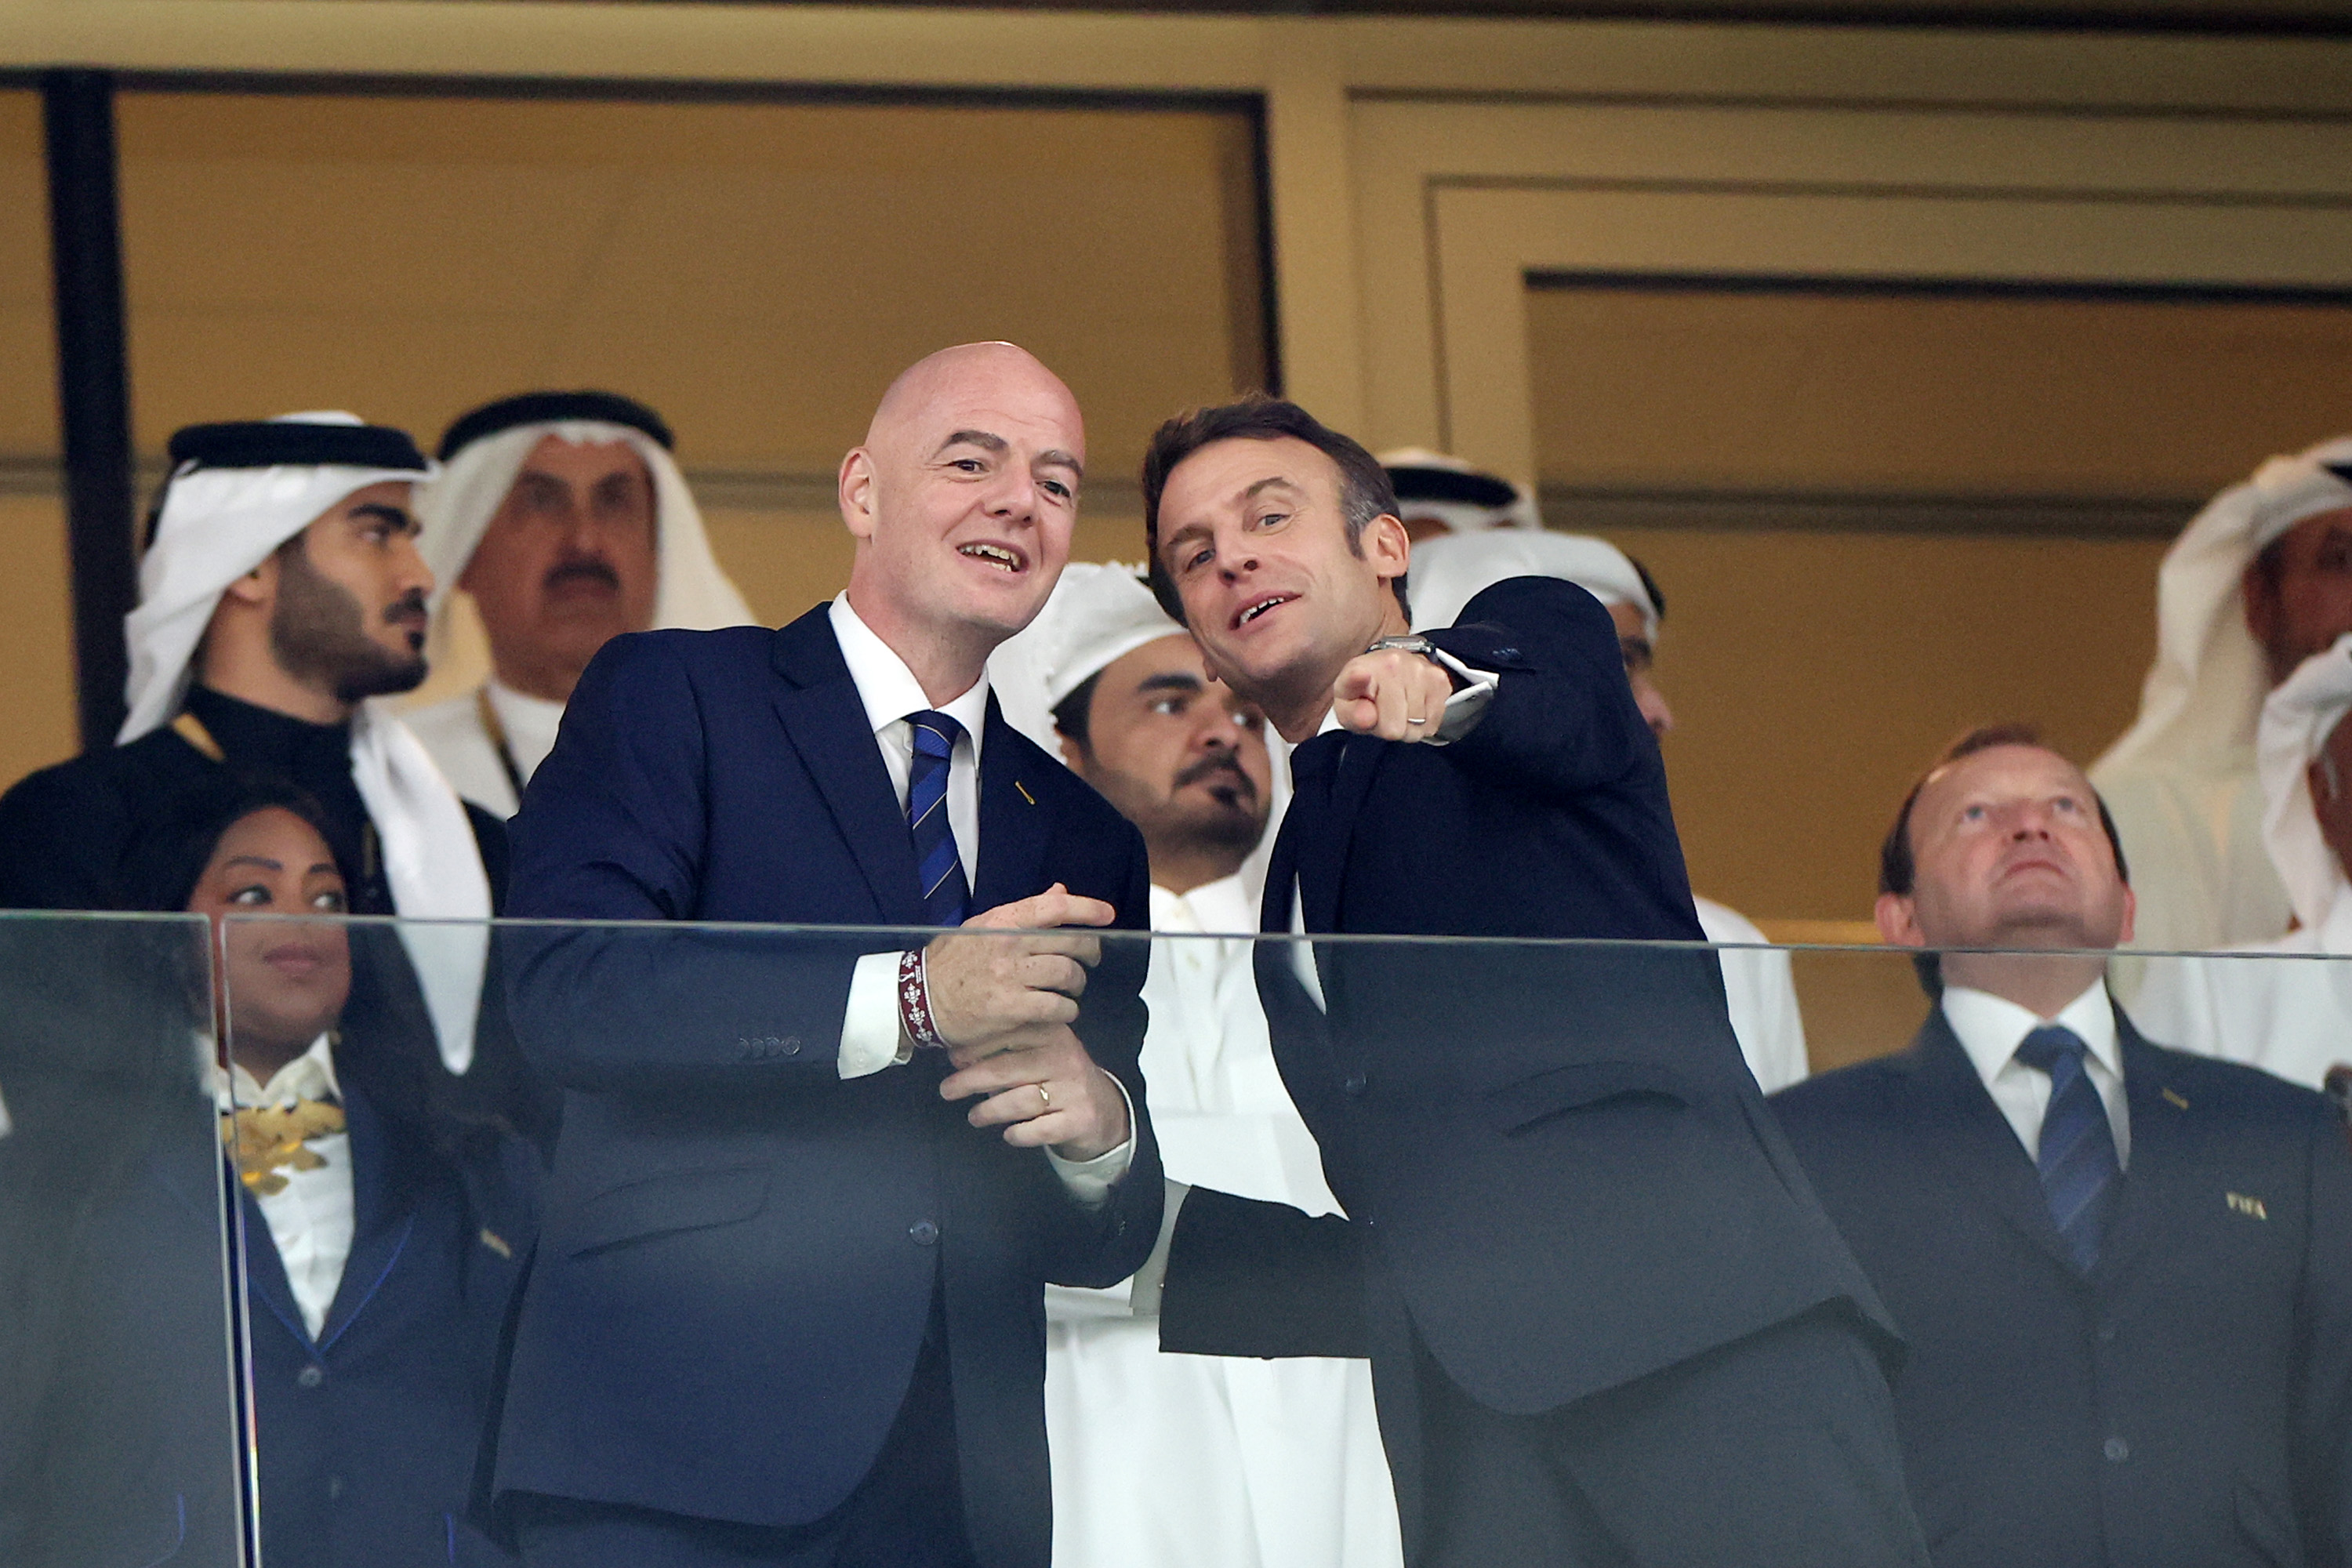 Gianni Infantino, President of FIFA, and French President Emmanuel Macron shake hands prior to the FIFA World Cup Qatar 2022 Final match between Argentina and France at Lusail Stadium on December 18, 2022 in Lusail City, Qatar.